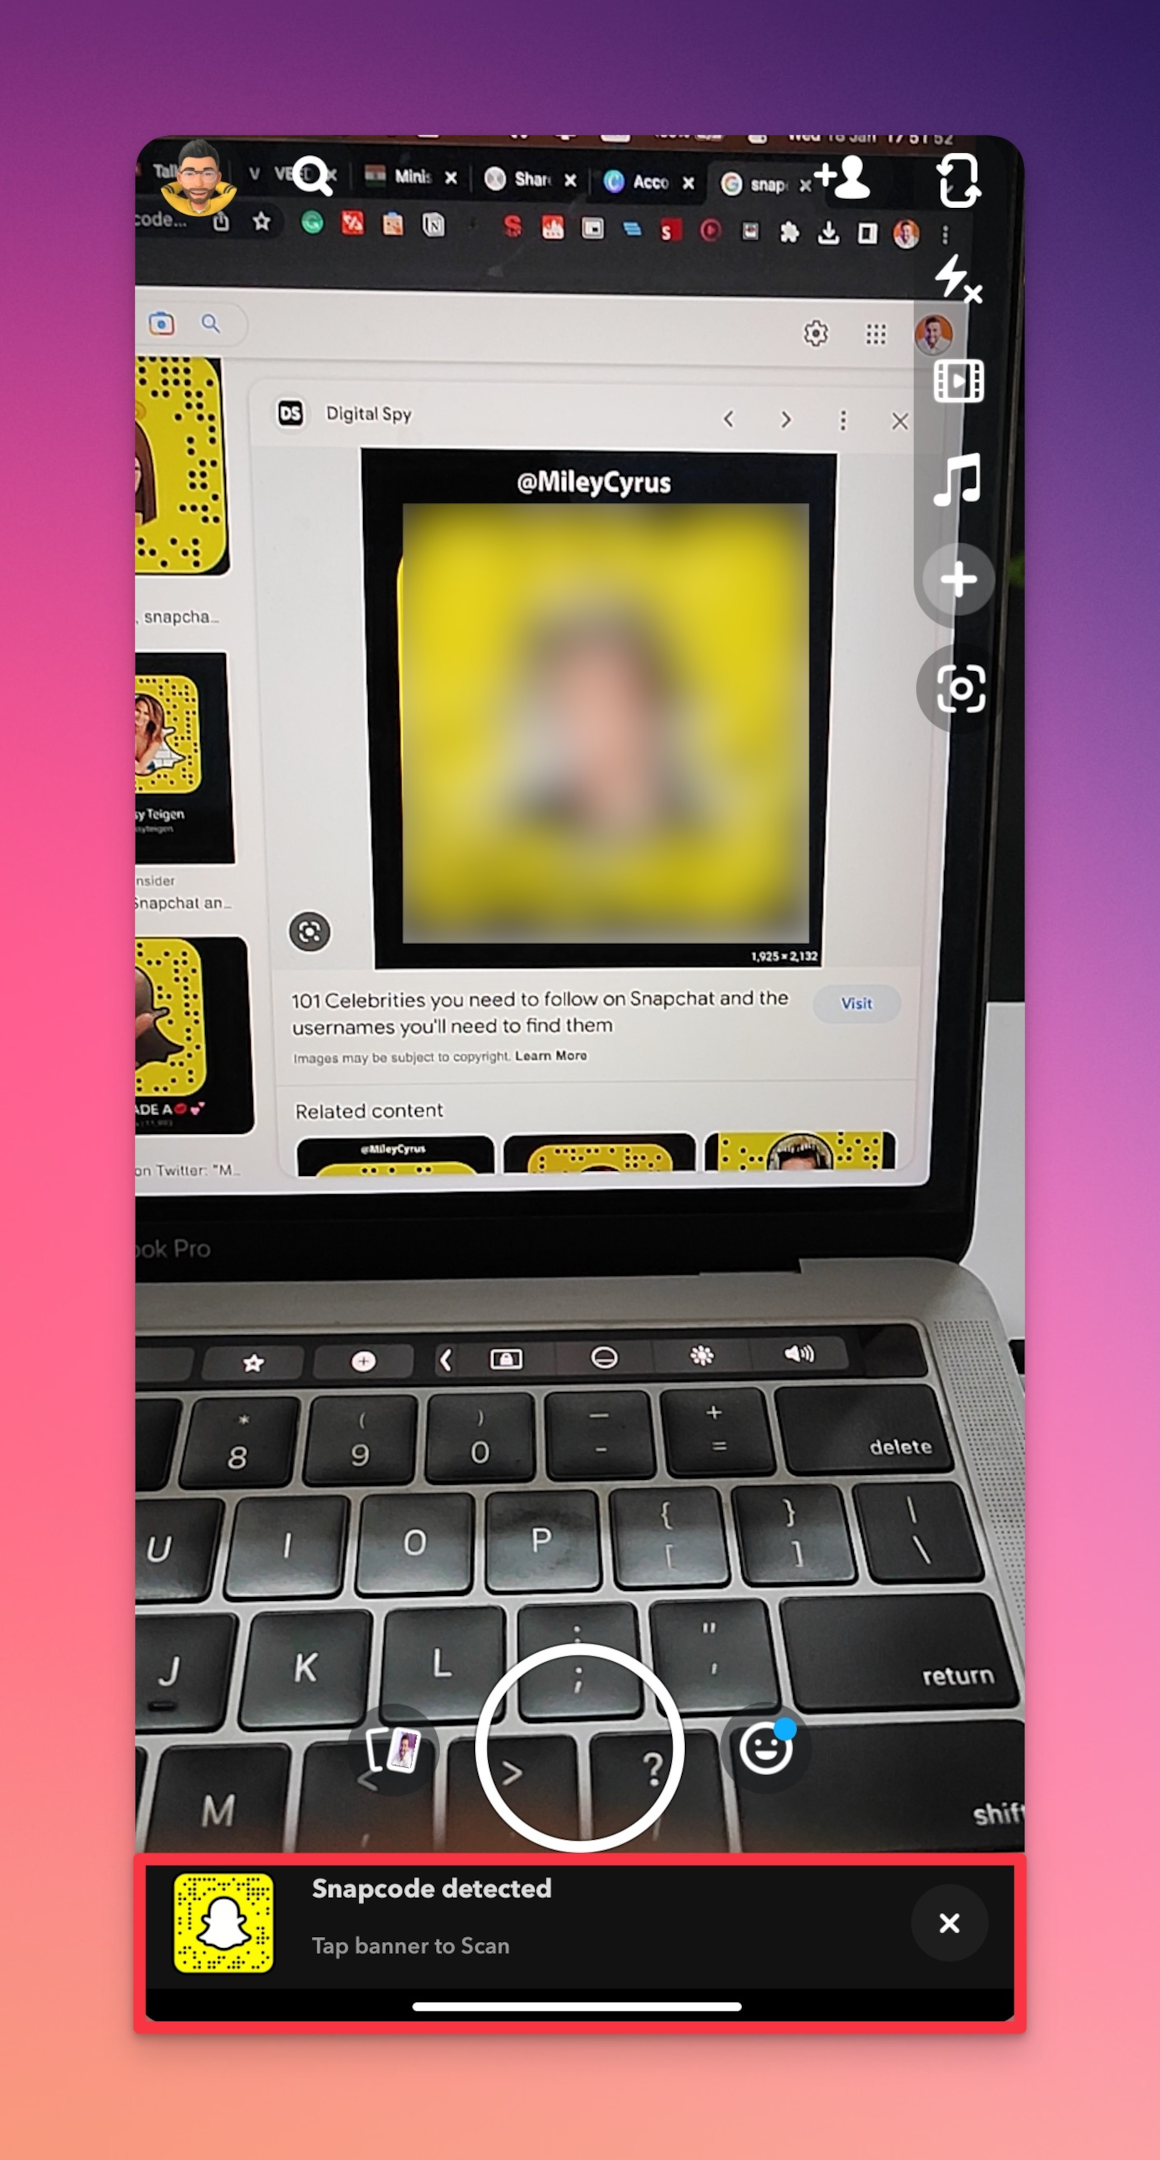 Remote.tools showing how to scan a snapcode on Snapchat app, instead of finding someone on Snapchat to add as friends.